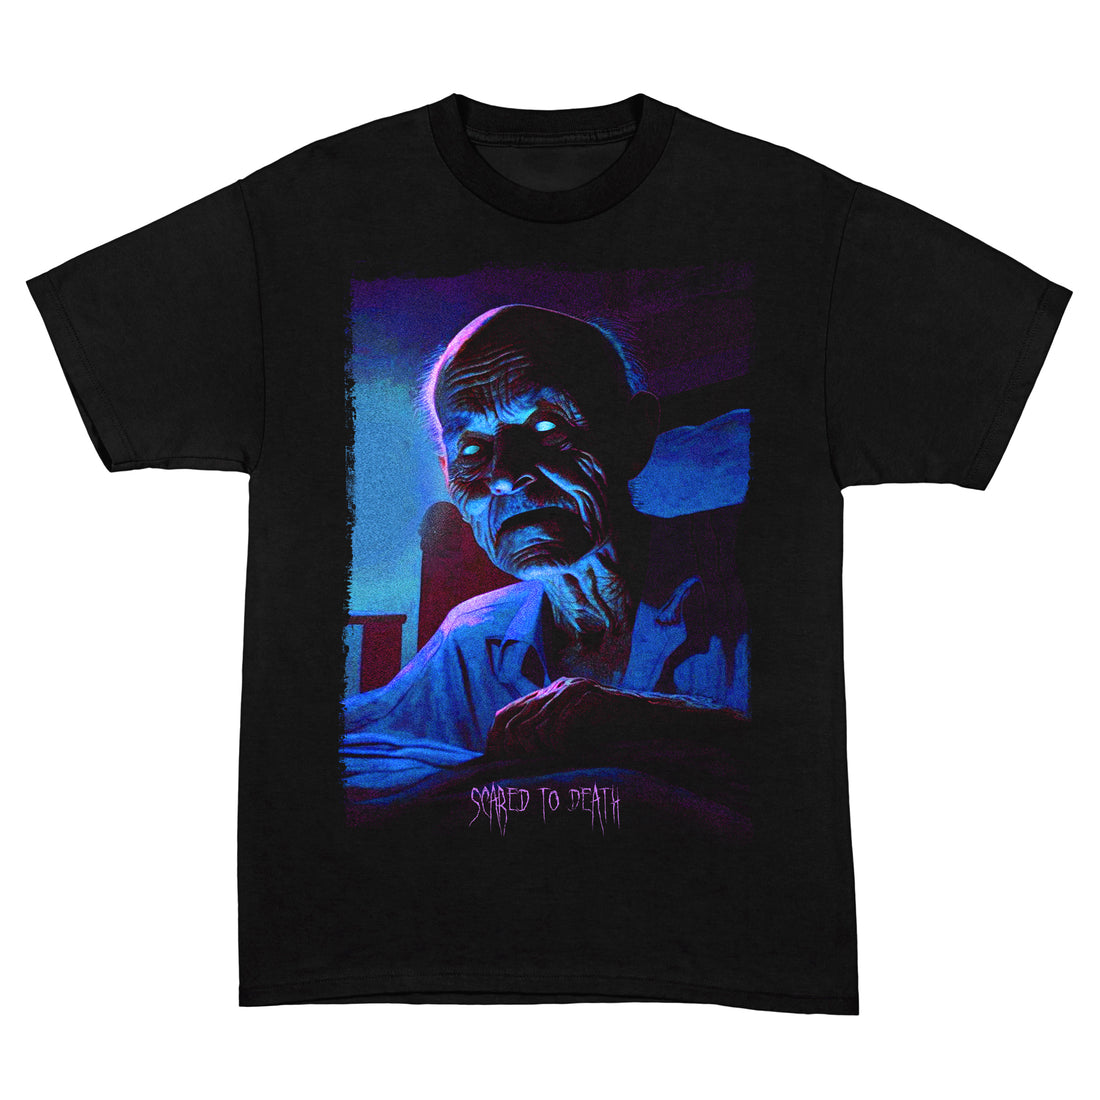 The Old Man Tee